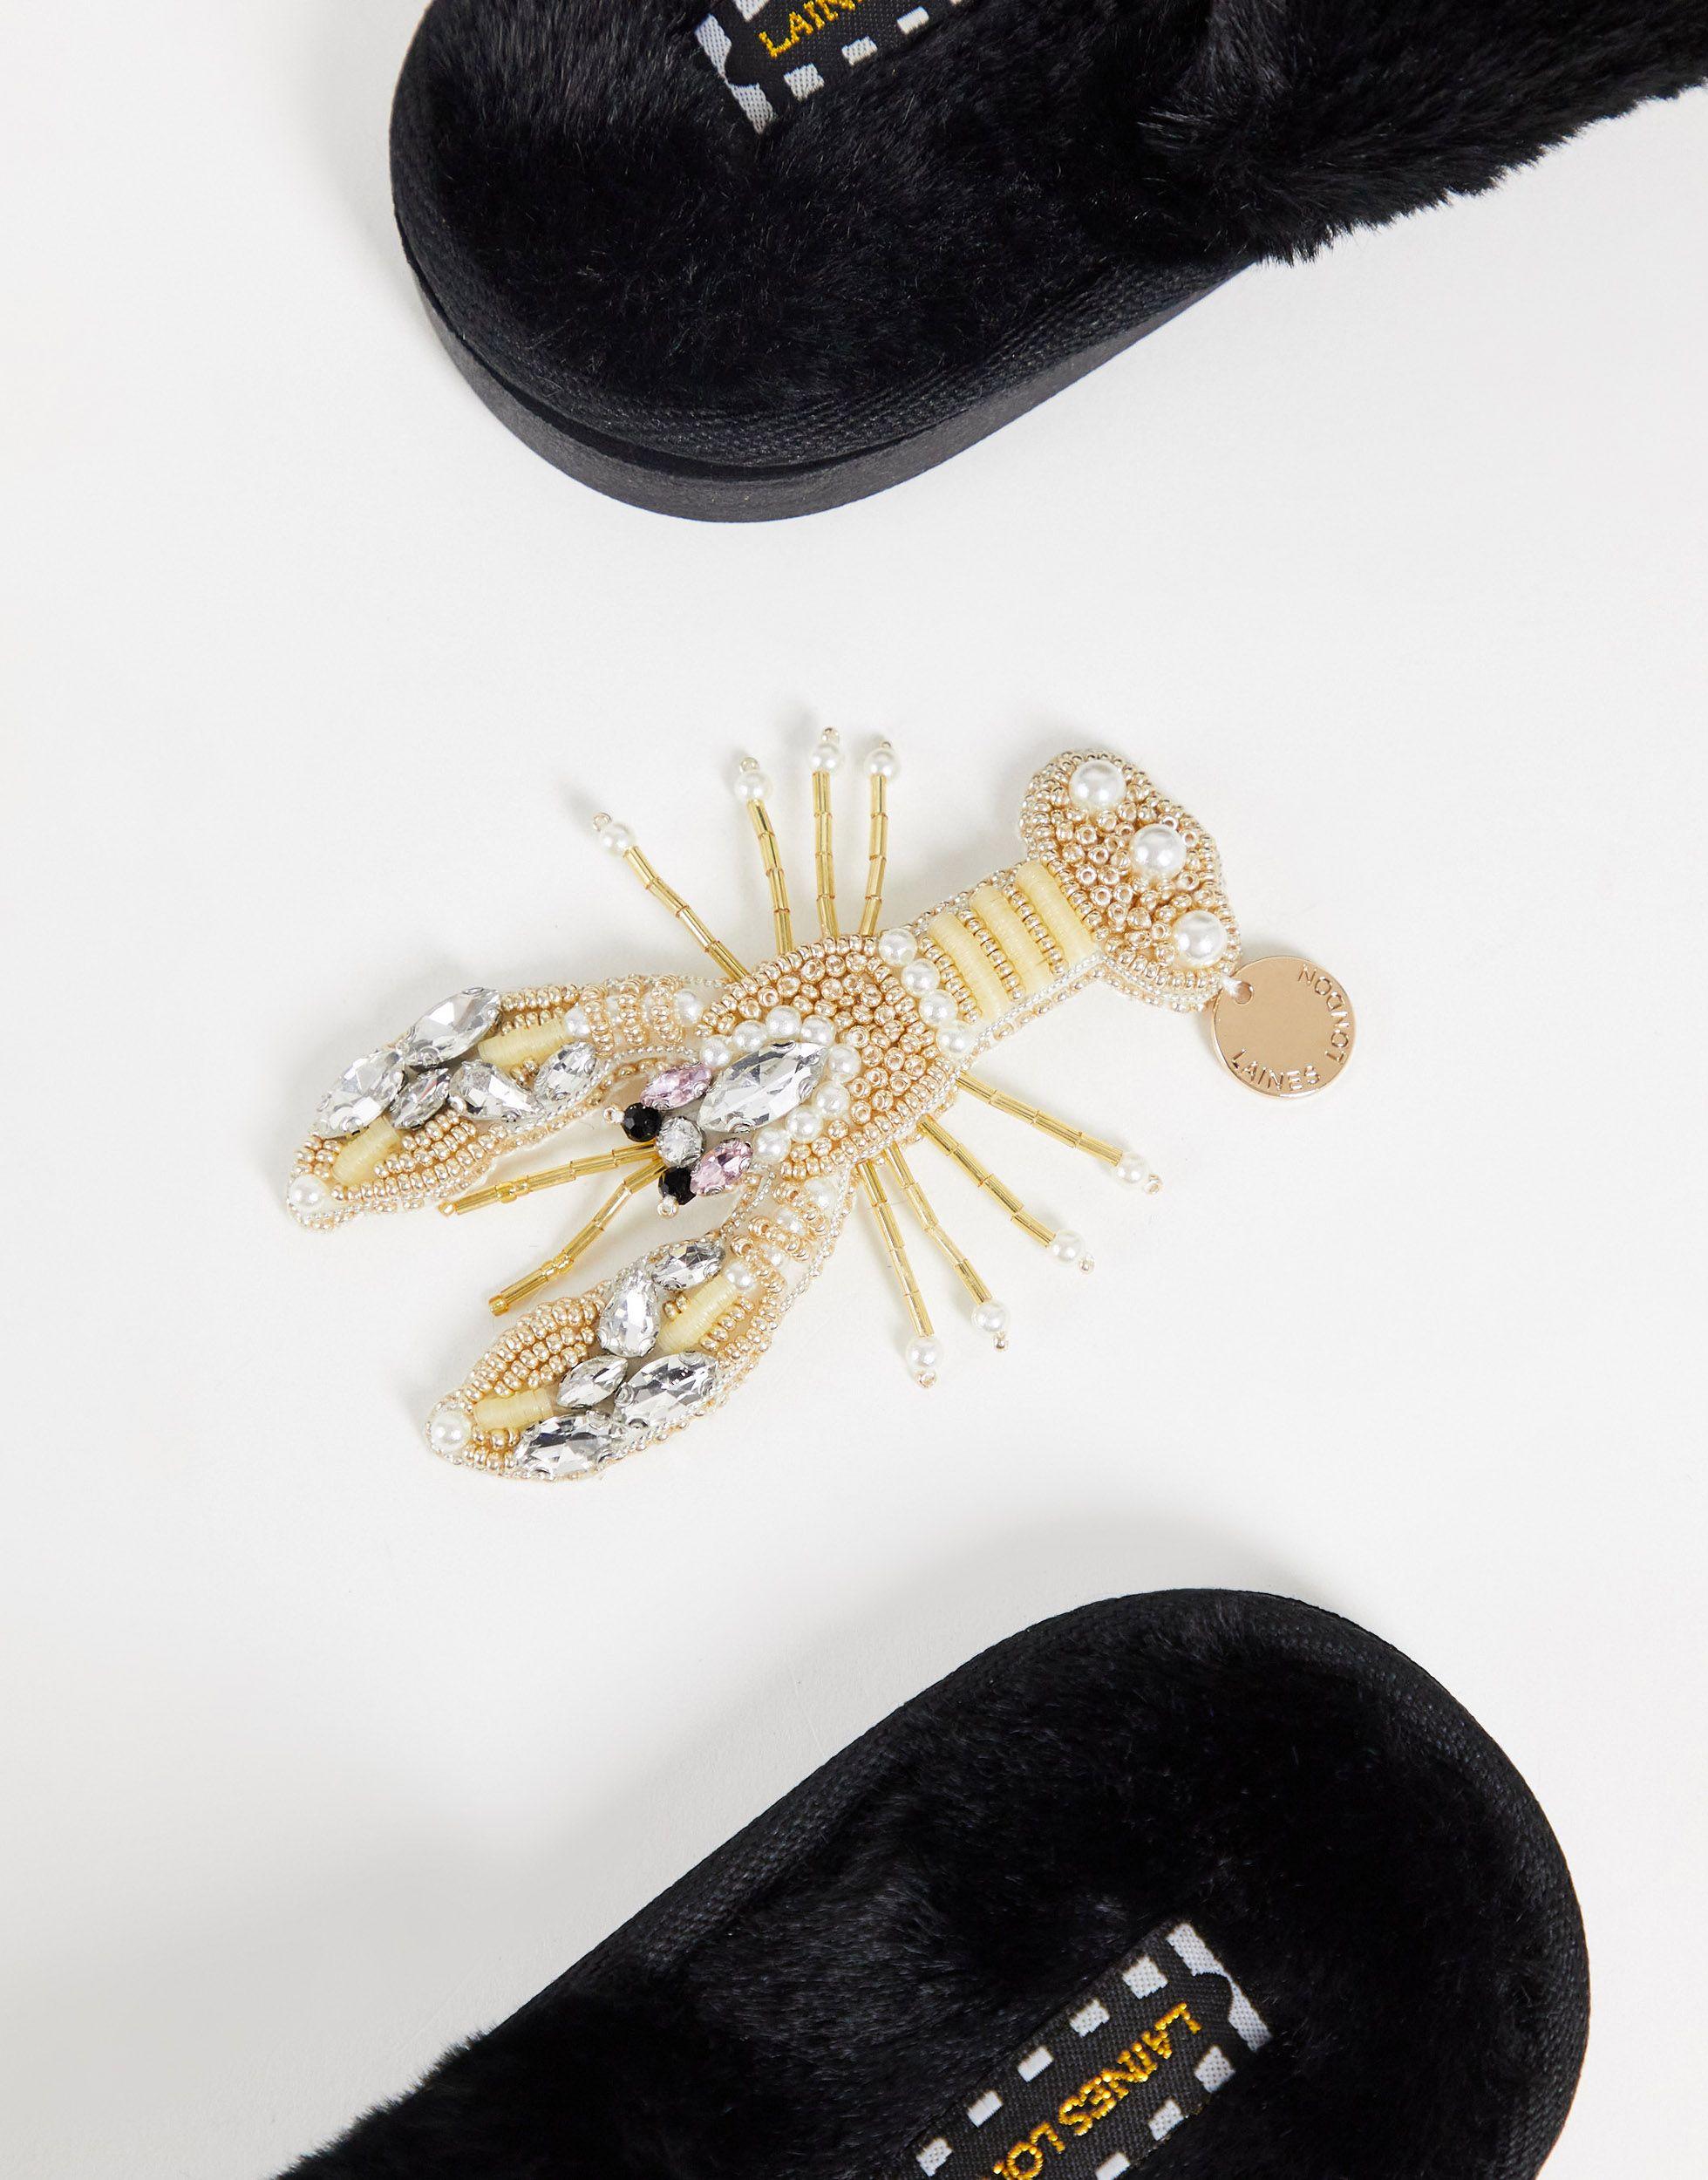 Laines London Lobster Slipper With Detachable Brooch in Black